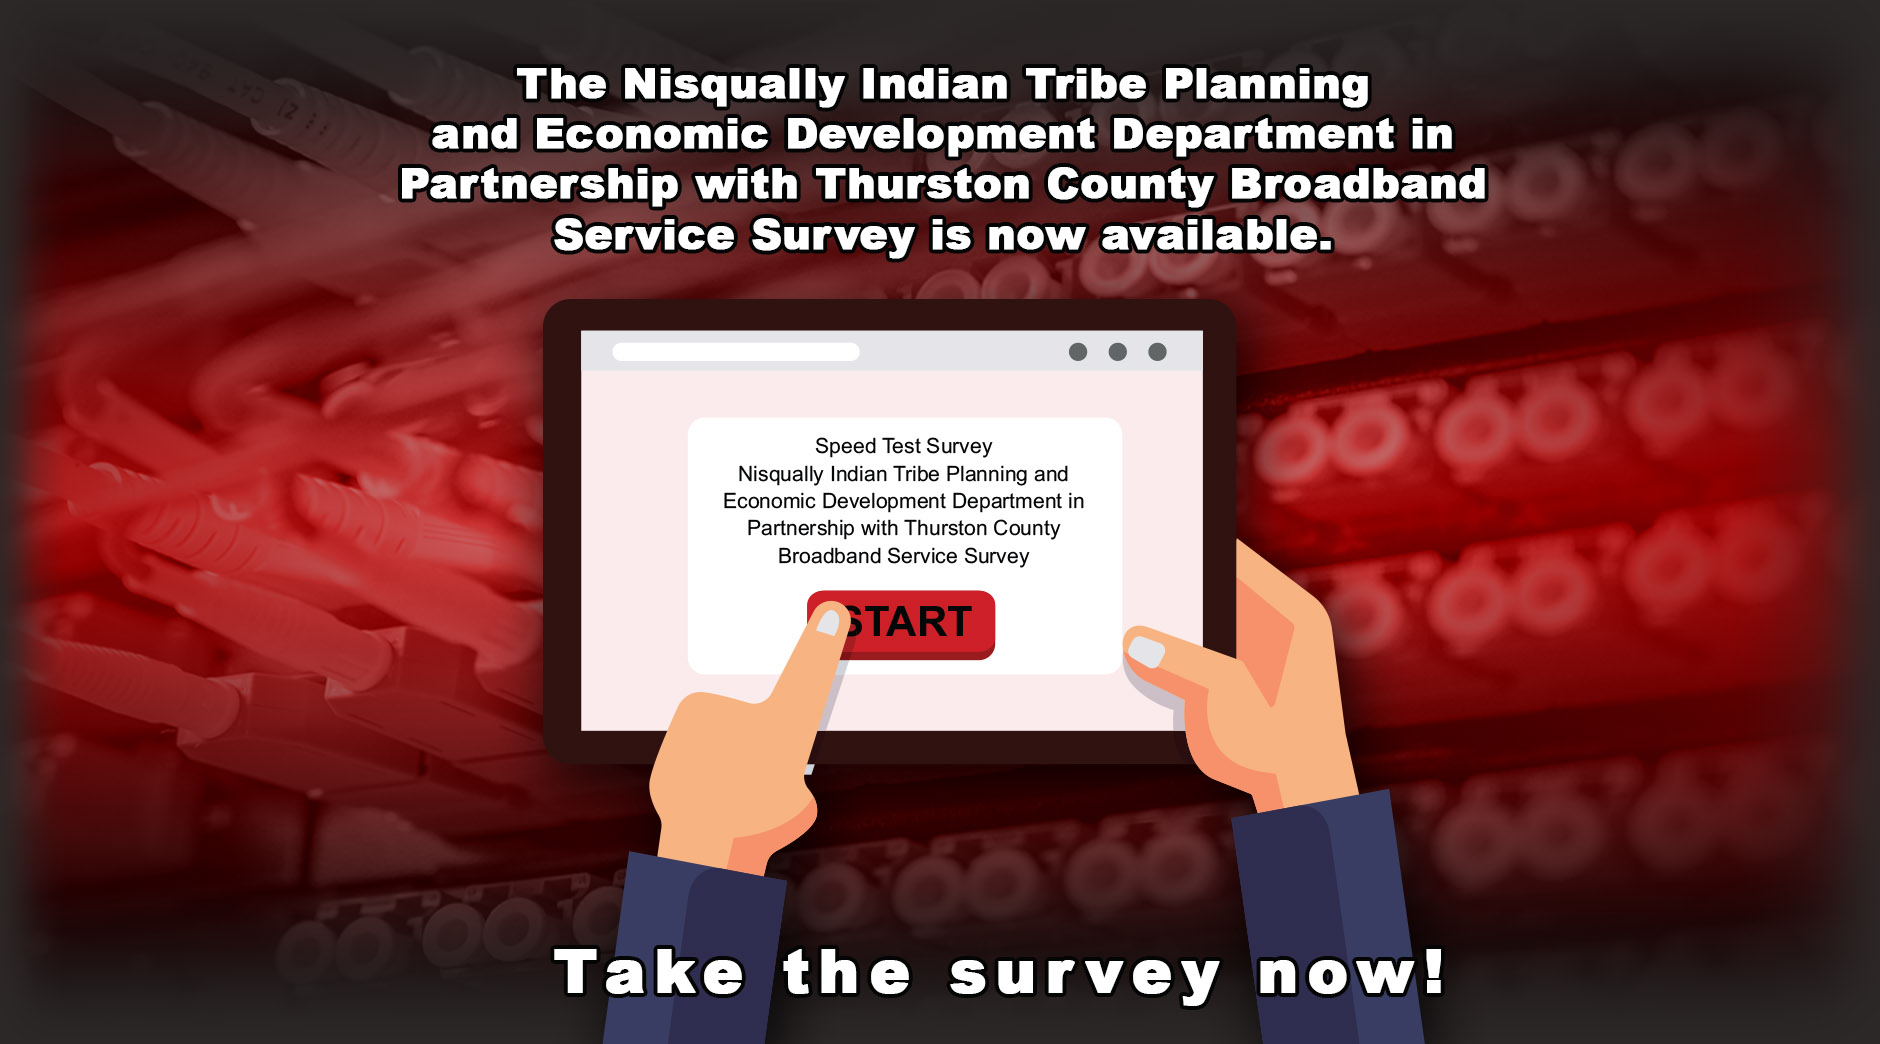 The Nisqually Indian Tribe Planning and Economic Development Department in Partnership with Thurston County Broadband Service Survey is now available.